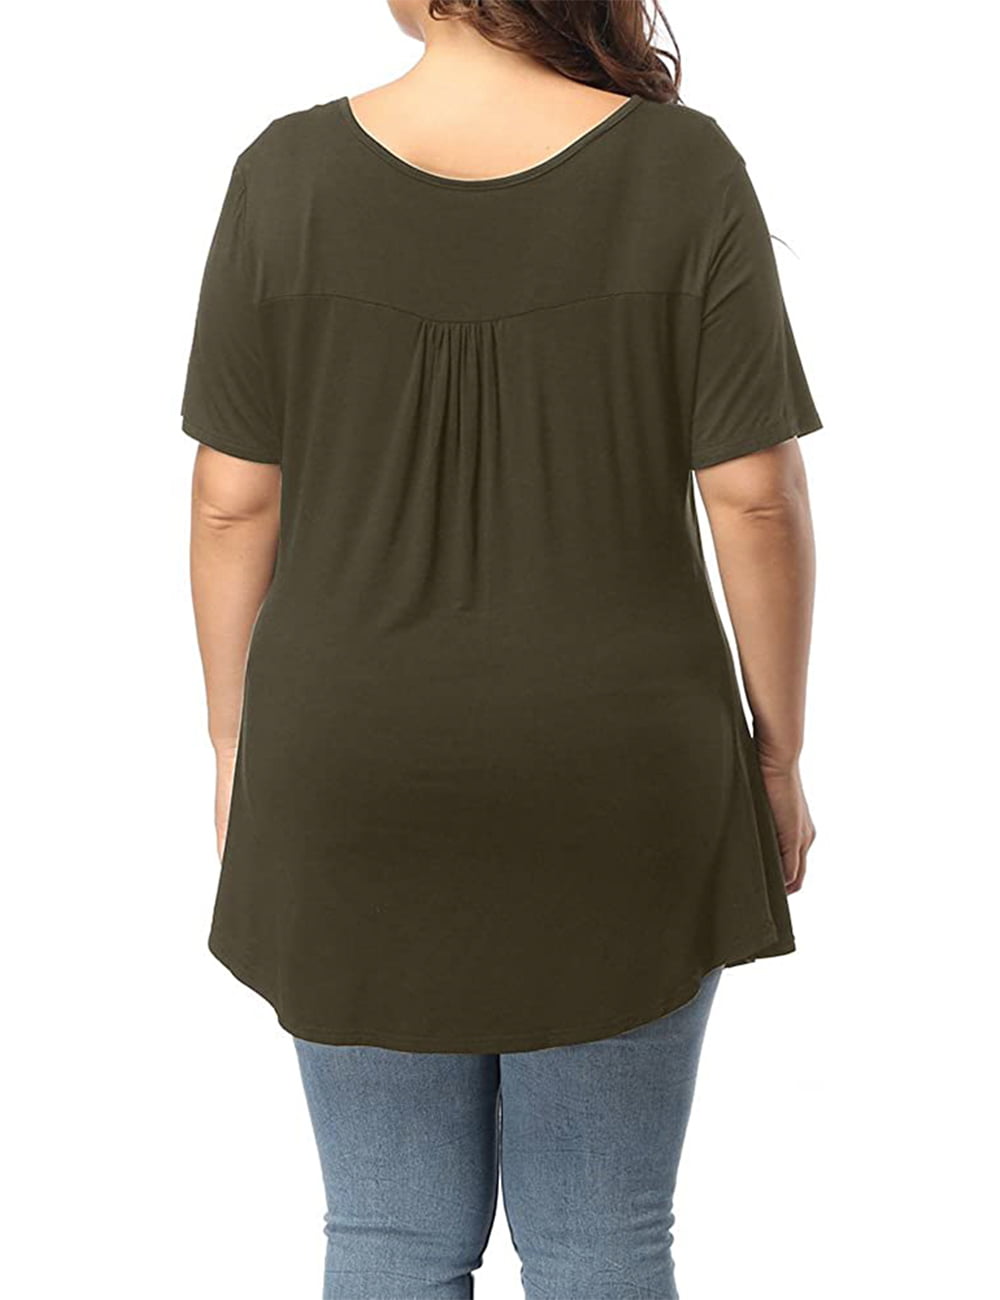 Women's Maternity Short Sleeve Woven Sheer Soft Flowing Round Neck Tunic Tee Top 